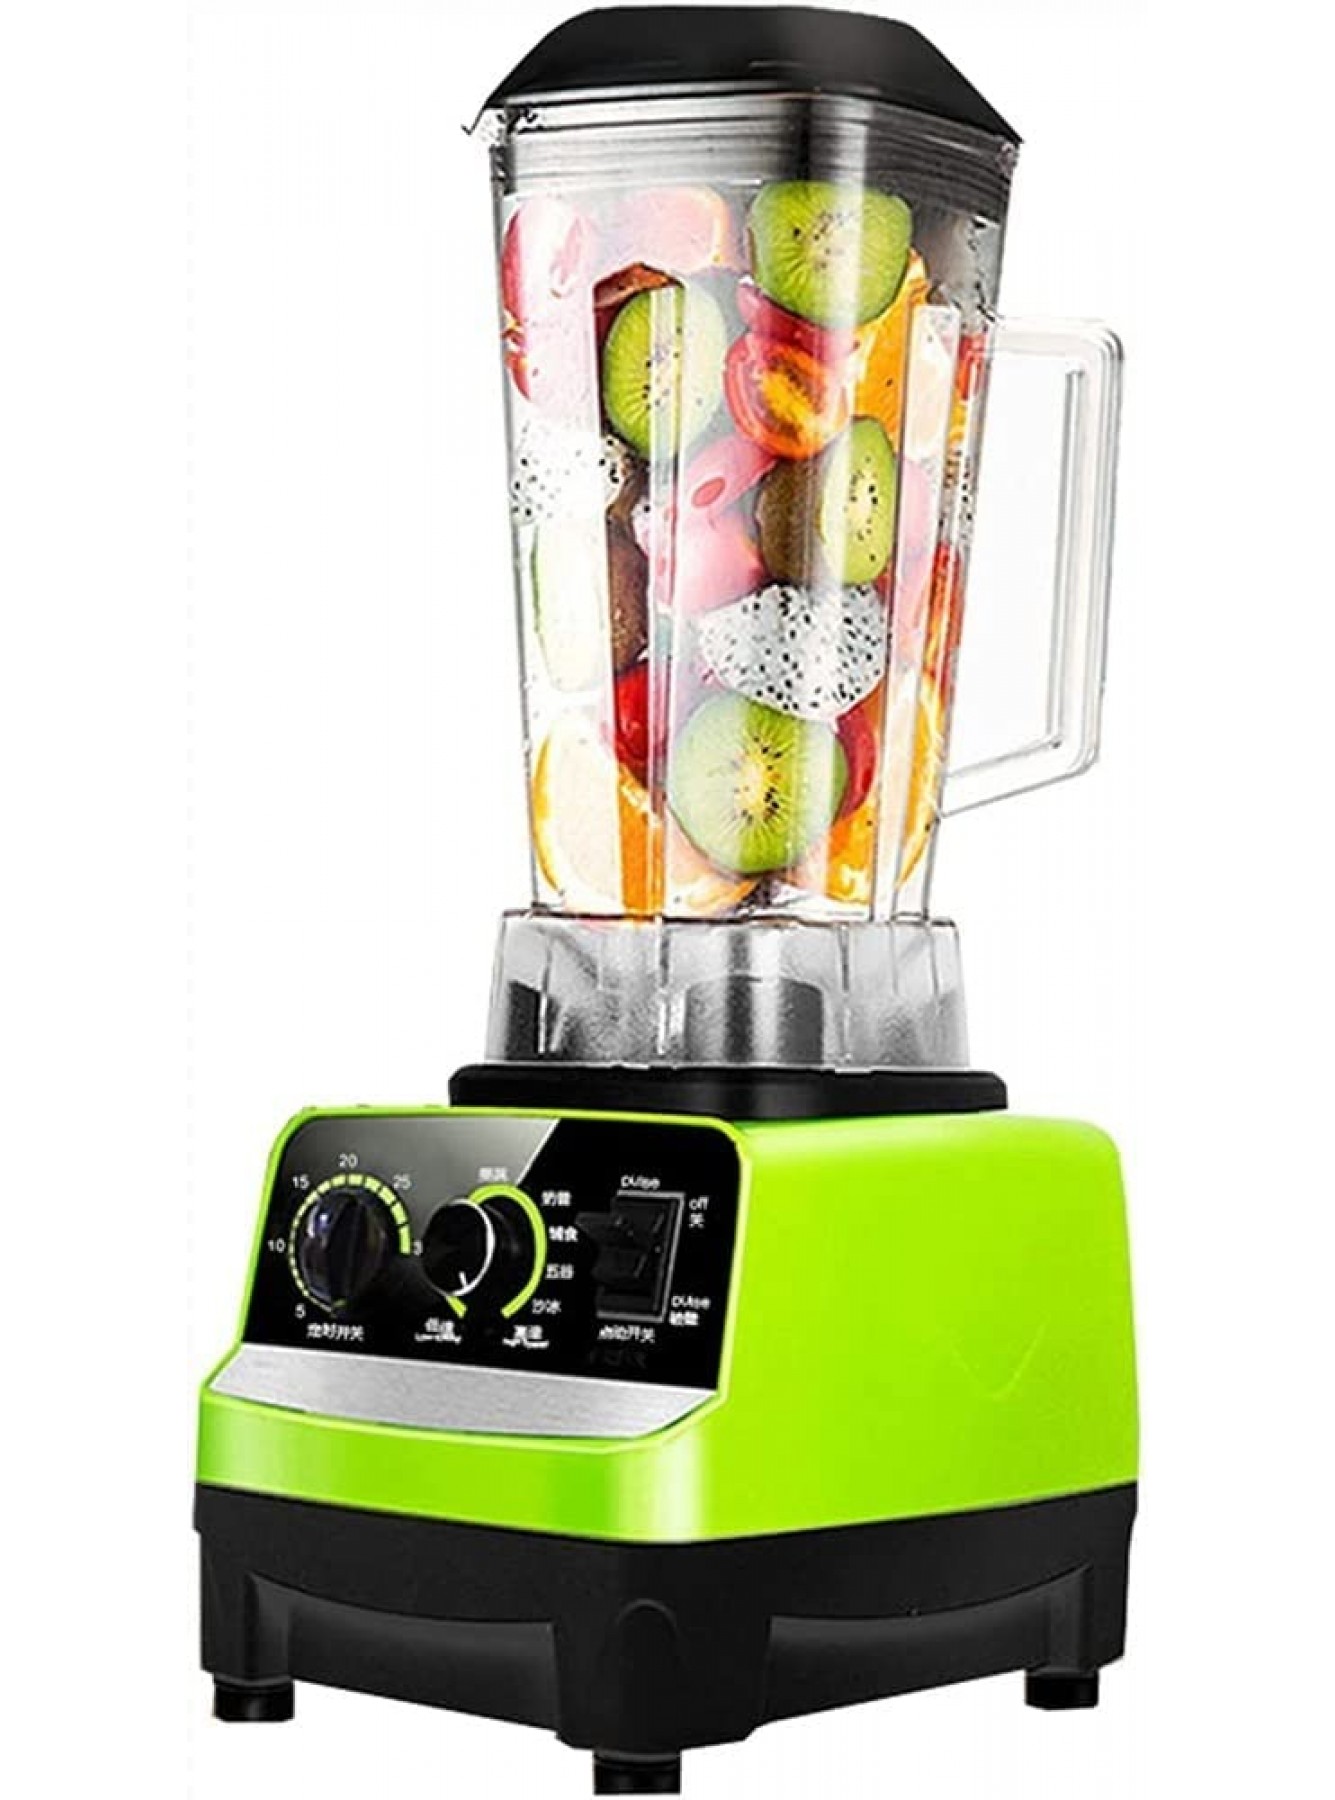 Professional Blender,Commercial Countertop Blender Smoothie Maker,1000W Heavy Duty High Speed 50000rpm min Kitchen Smoothie Blender Food Mixer 2L for Soup,fish Crusing Ice Frozen Desser Shakes and B0B3JDCTFN